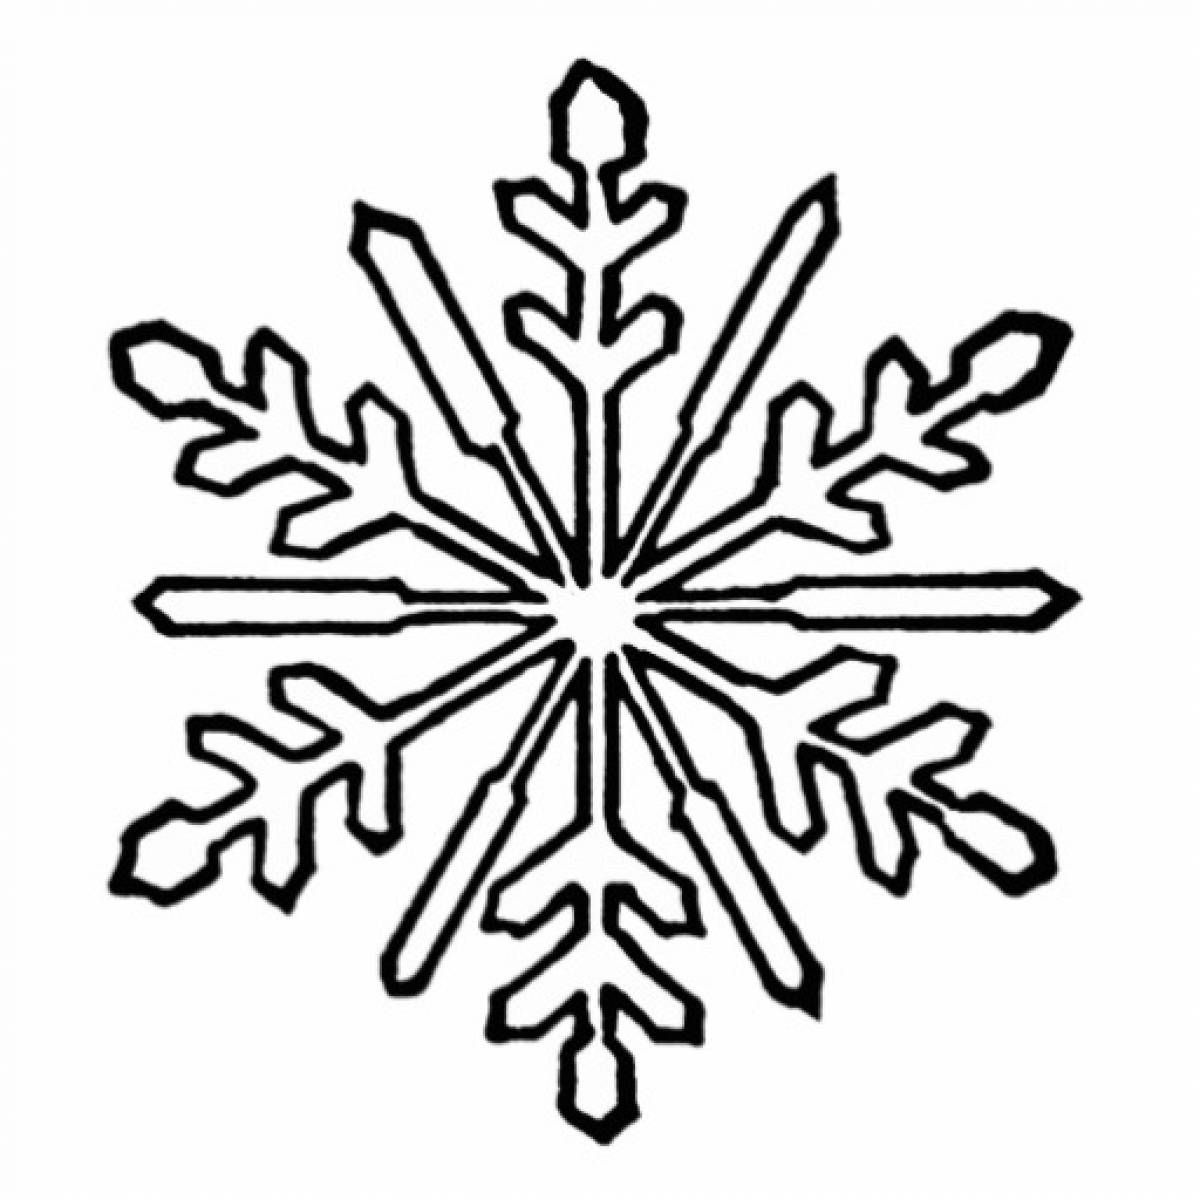 Pointed snowflake